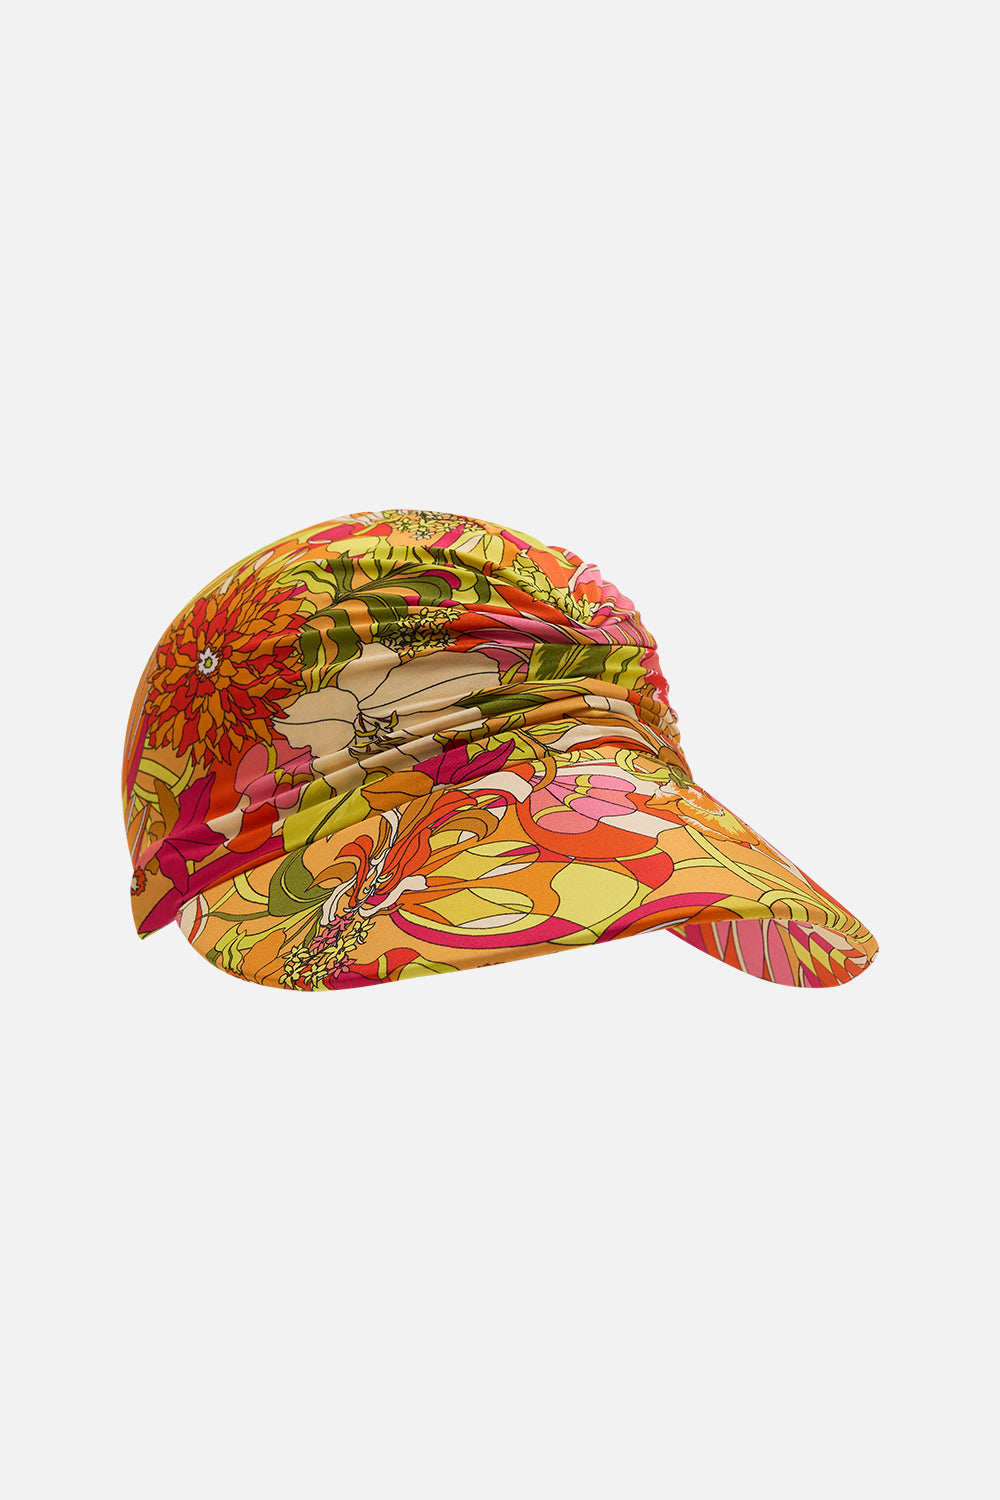 CAMILLA Floral Ruched Beach Hat in The Flower Child Society print